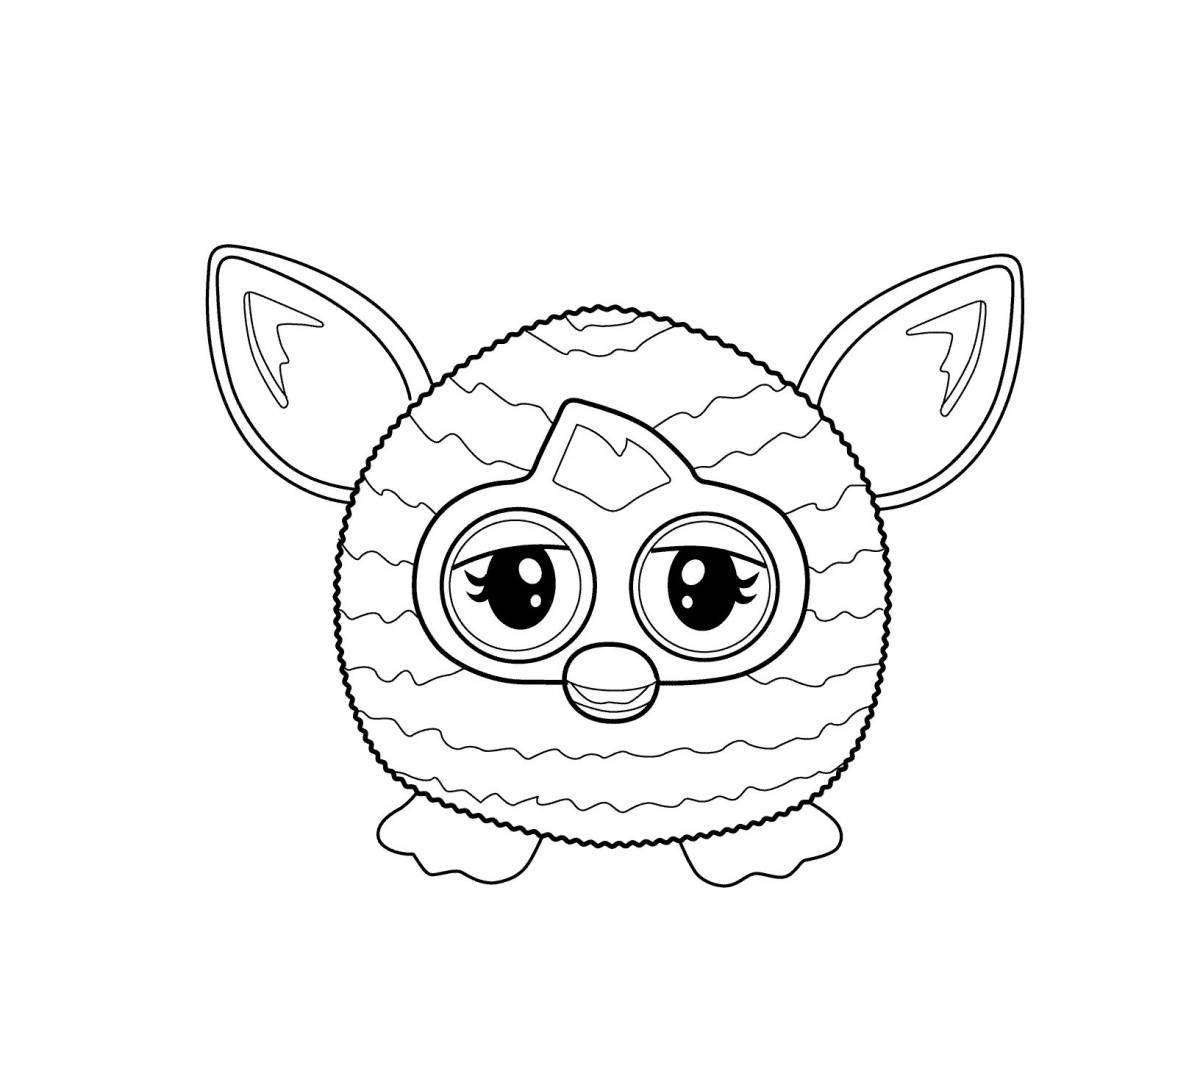 Playful three marker coloring page